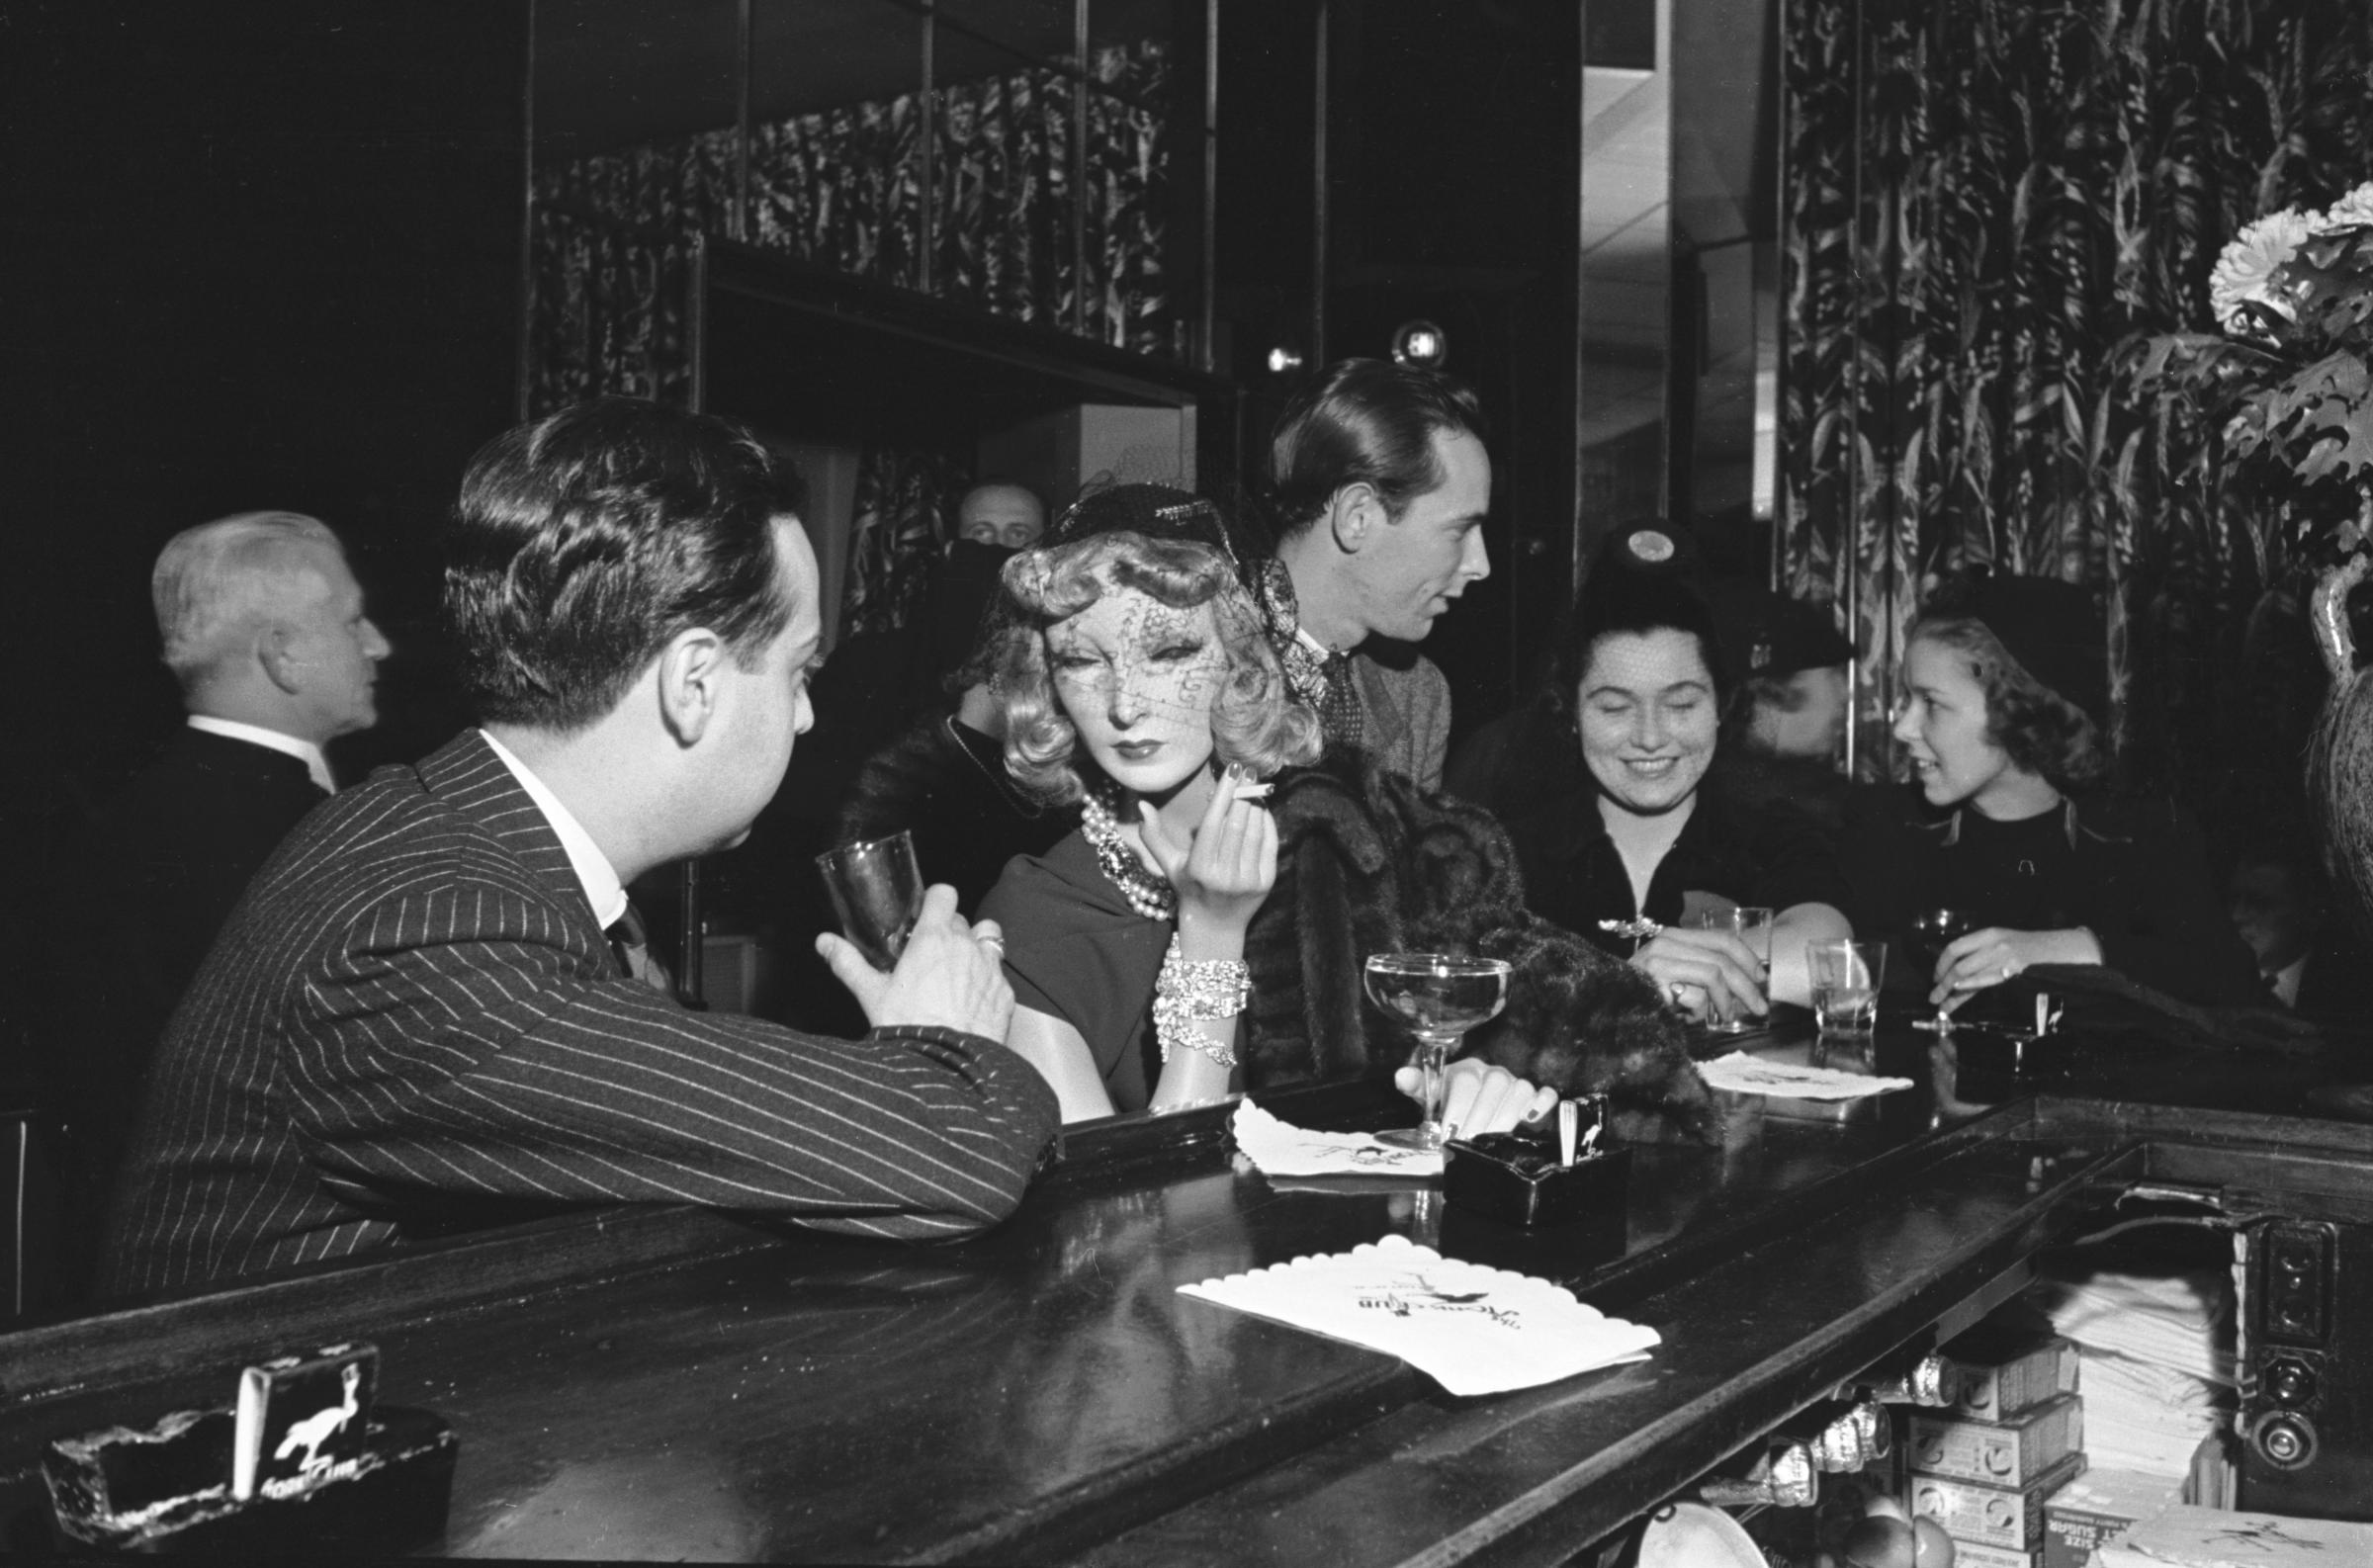 Artist Lester Gabba and his lifelike mannequin Cynthia, created for Saks Fifth Avenue, enjoy a drink at the Stork Club.